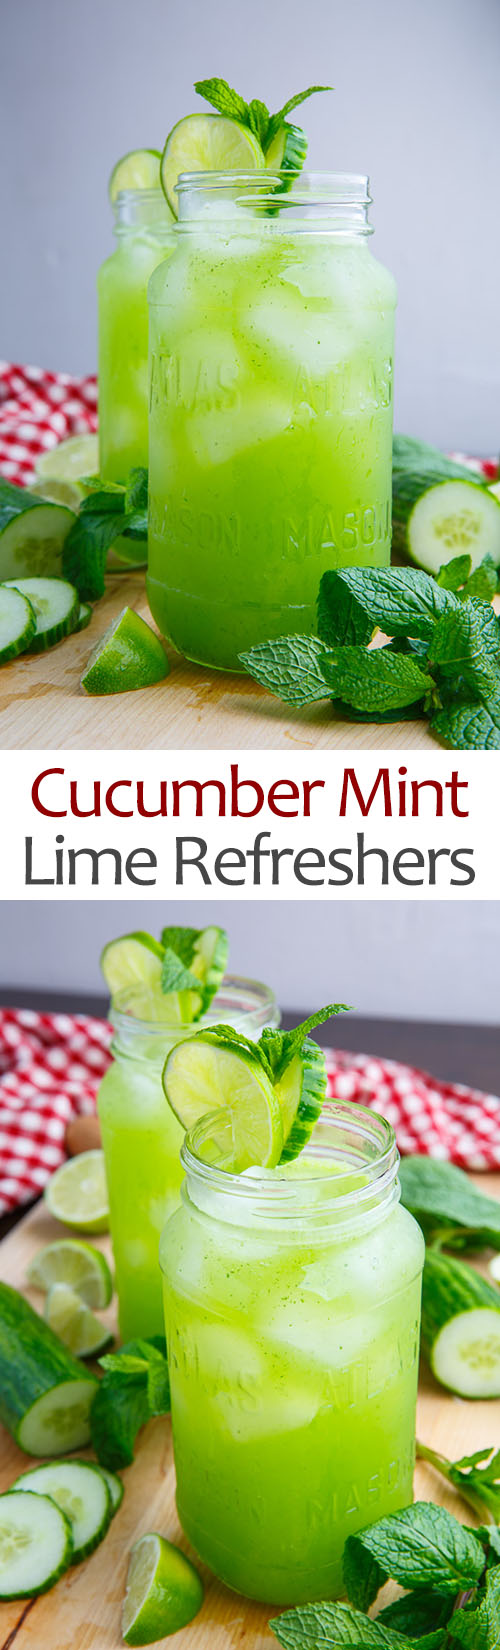 Cucumber, Mint and Lime Refreshers